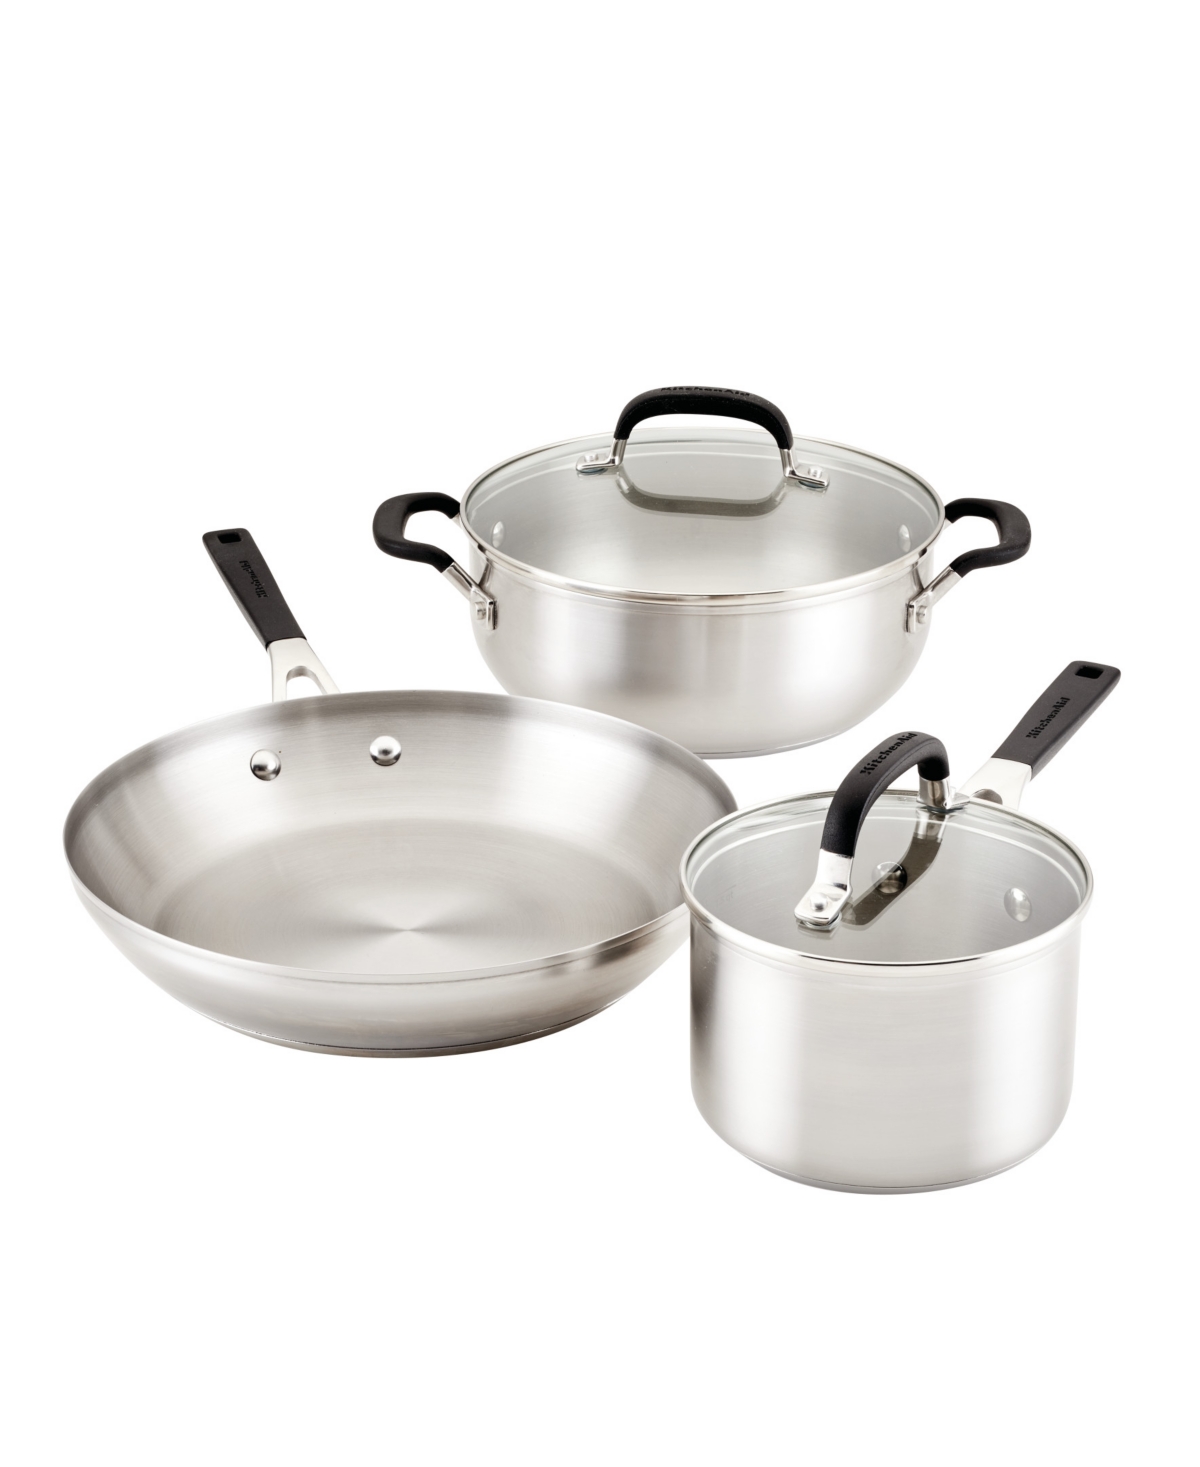 Kitchenaid Stainless Steel 5 Piece Cookware Set In Brushed Stainless Steel